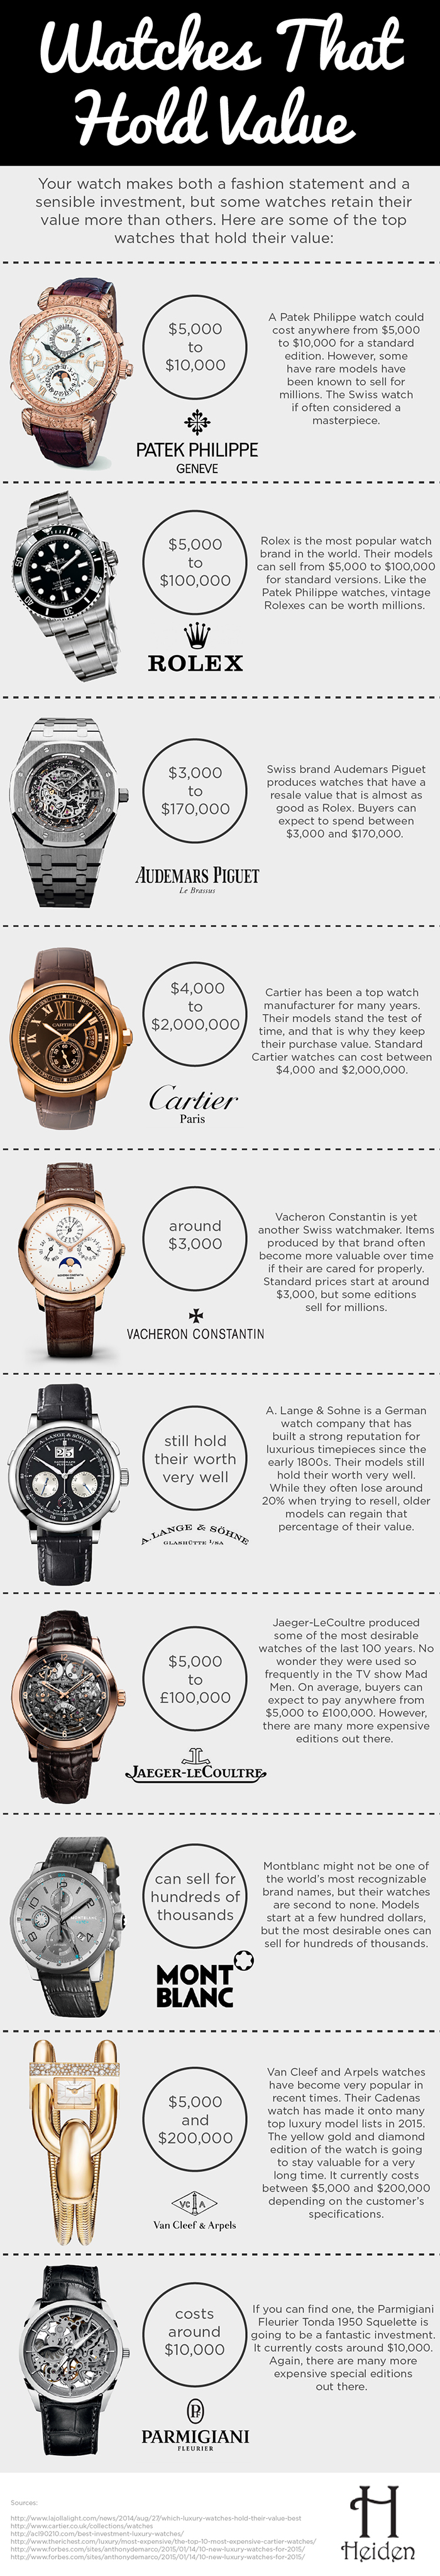 Driving Watches: What Are They And Which Are The Best?